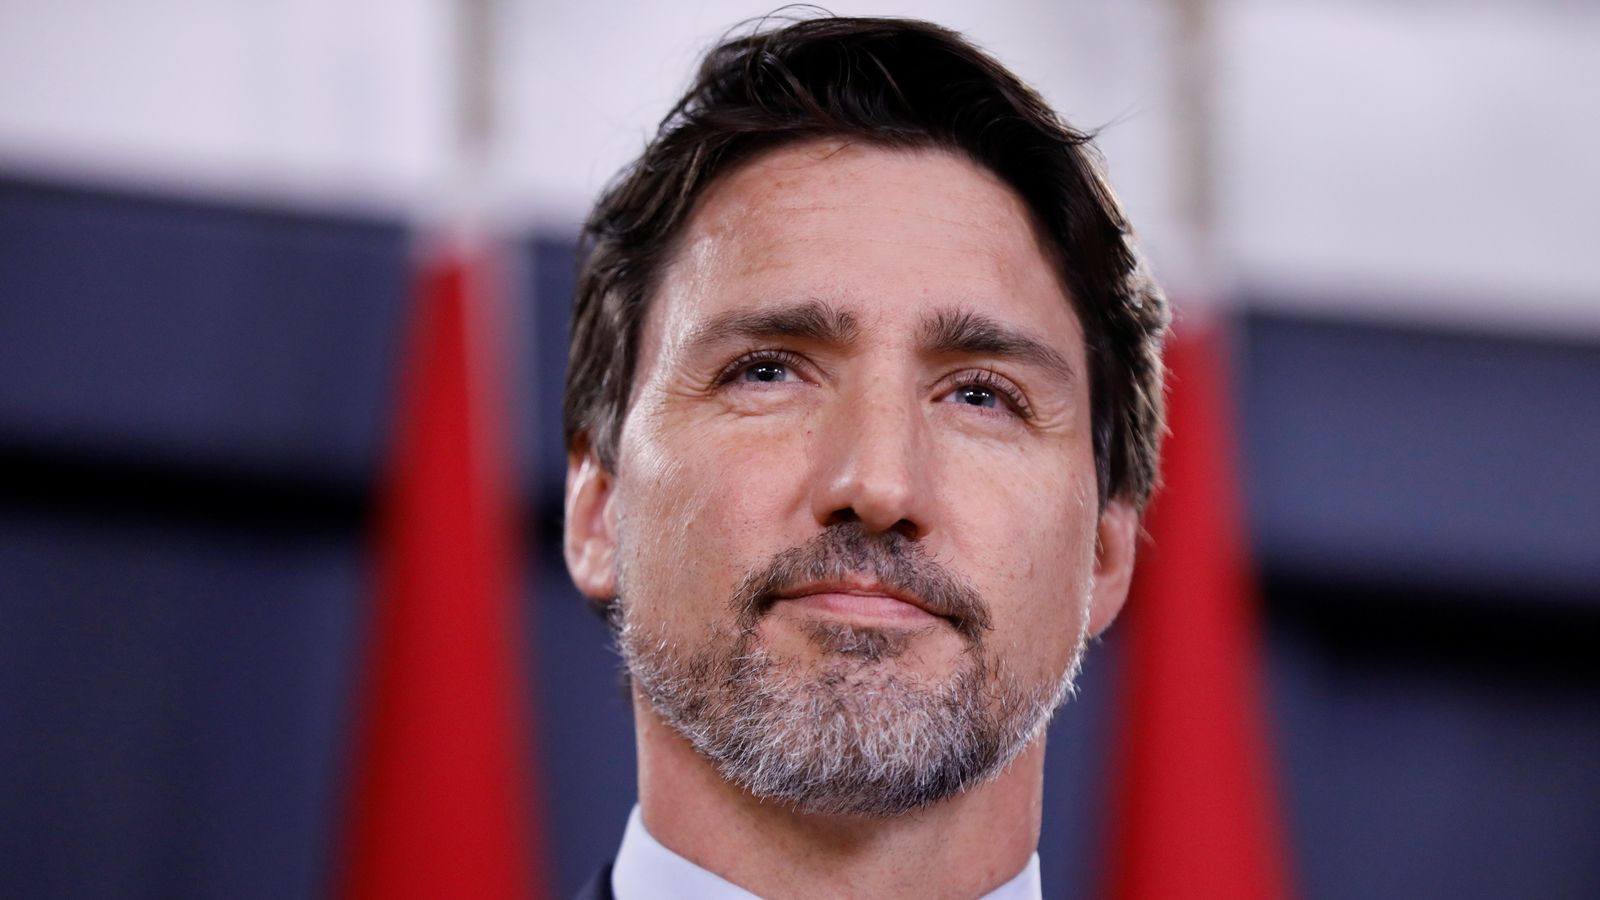 Justin Trudeau: Canadian PM called by prankster impersonating Greta ...